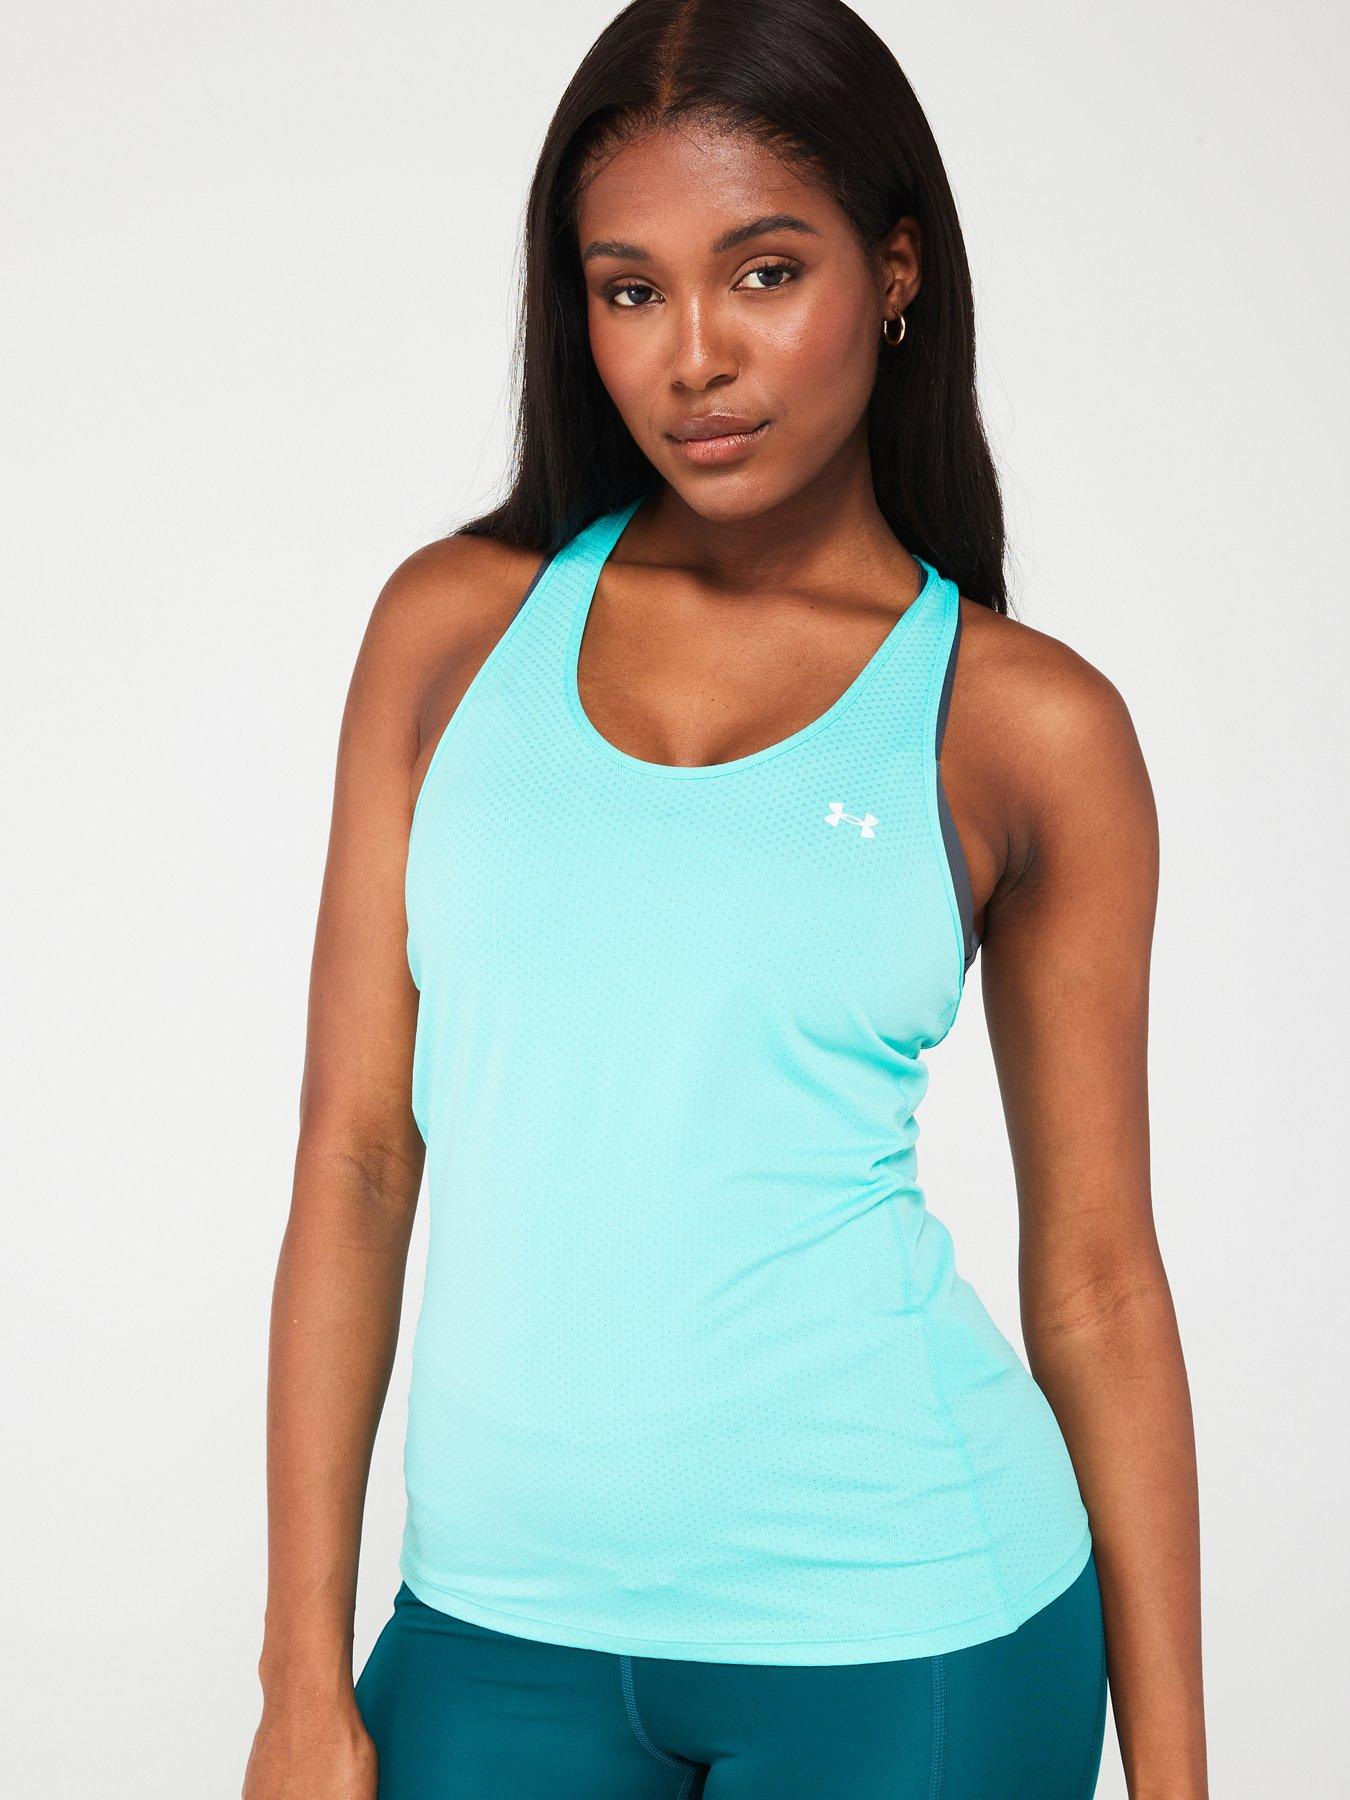 Under armour, Vests, Womens sports clothing